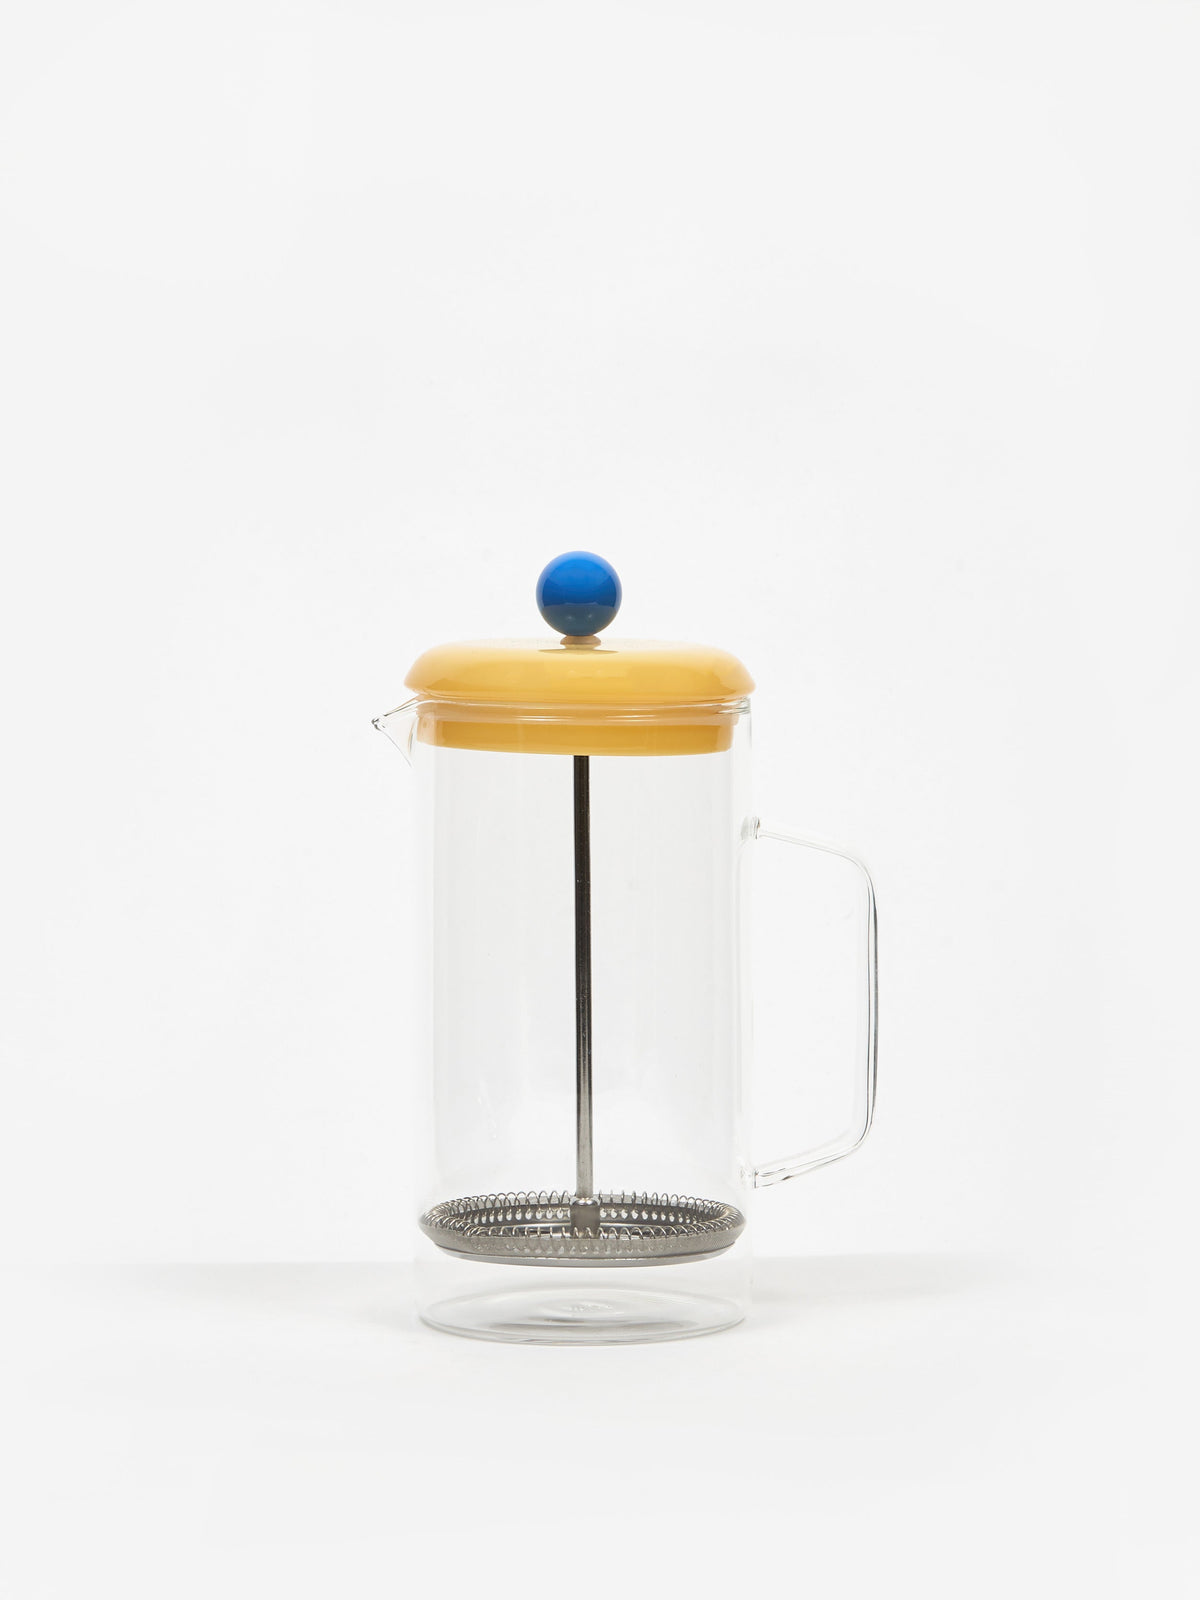 https://www.goodhoodstore.shop/wp-content/uploads/1692/02/find-your-hay-french-press-brewer-clear-hay-among-the-many-hay-french-press-brewer-clear-hay_0.jpg